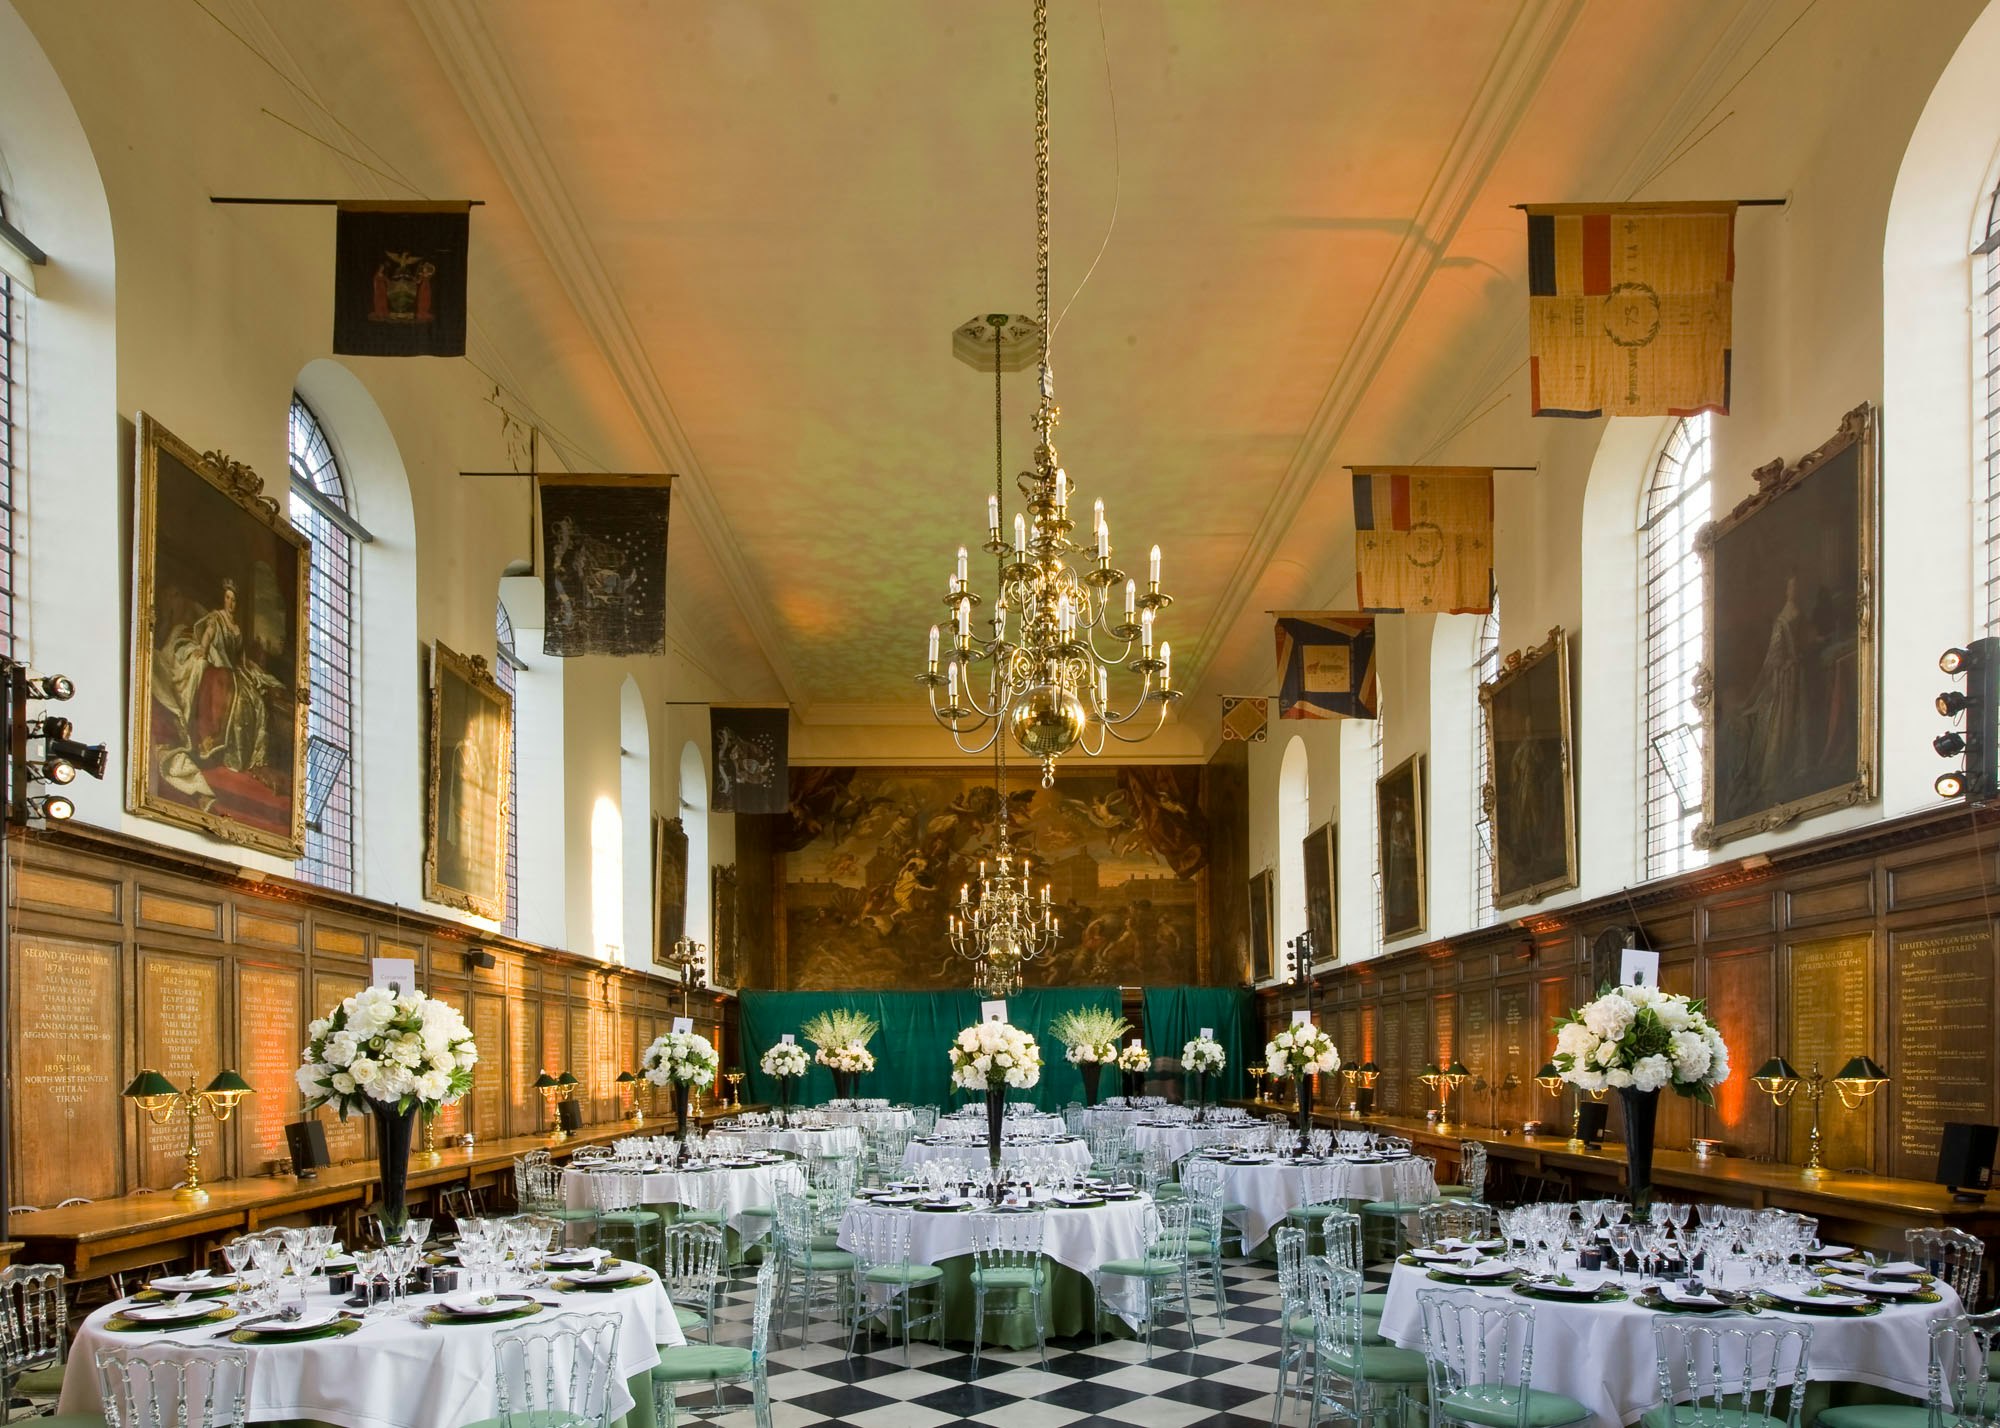 Royal Hospital Chelsea - The Great Hall image 1